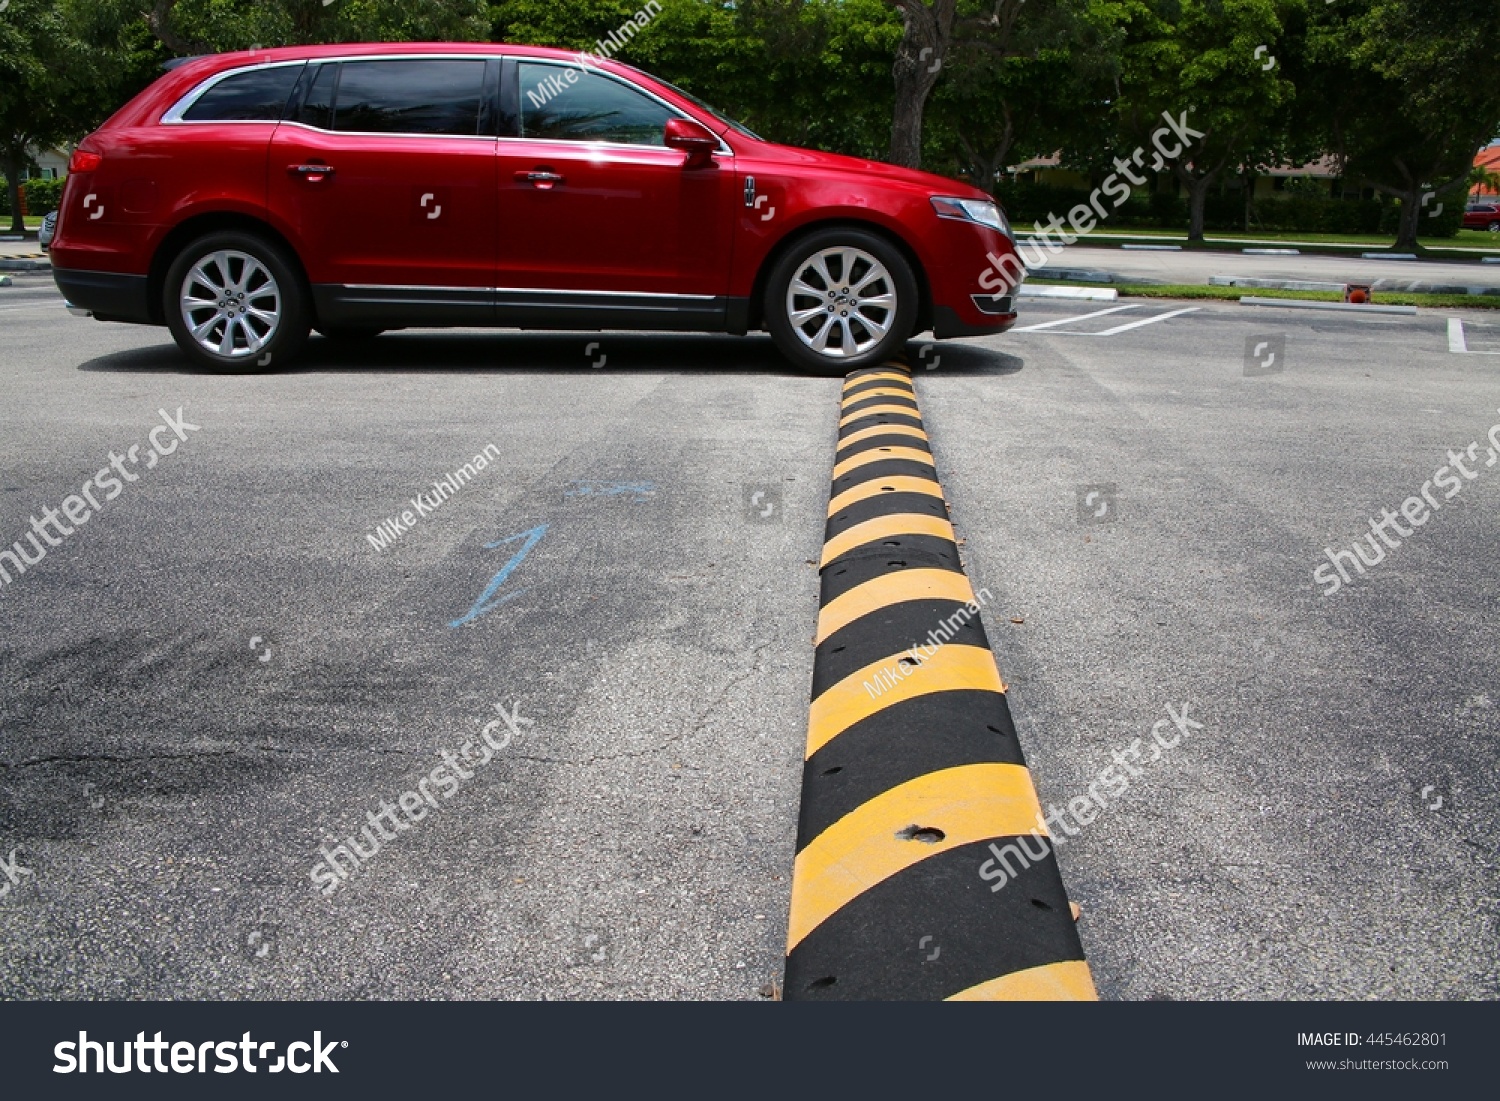 Red Minivan Driving Up to and Just Connecting with Yellow and Black Striped Speed Bump in Parking Lot with Diagonal Striped Spaces and Trees in the Background, Mid-Day #445462801